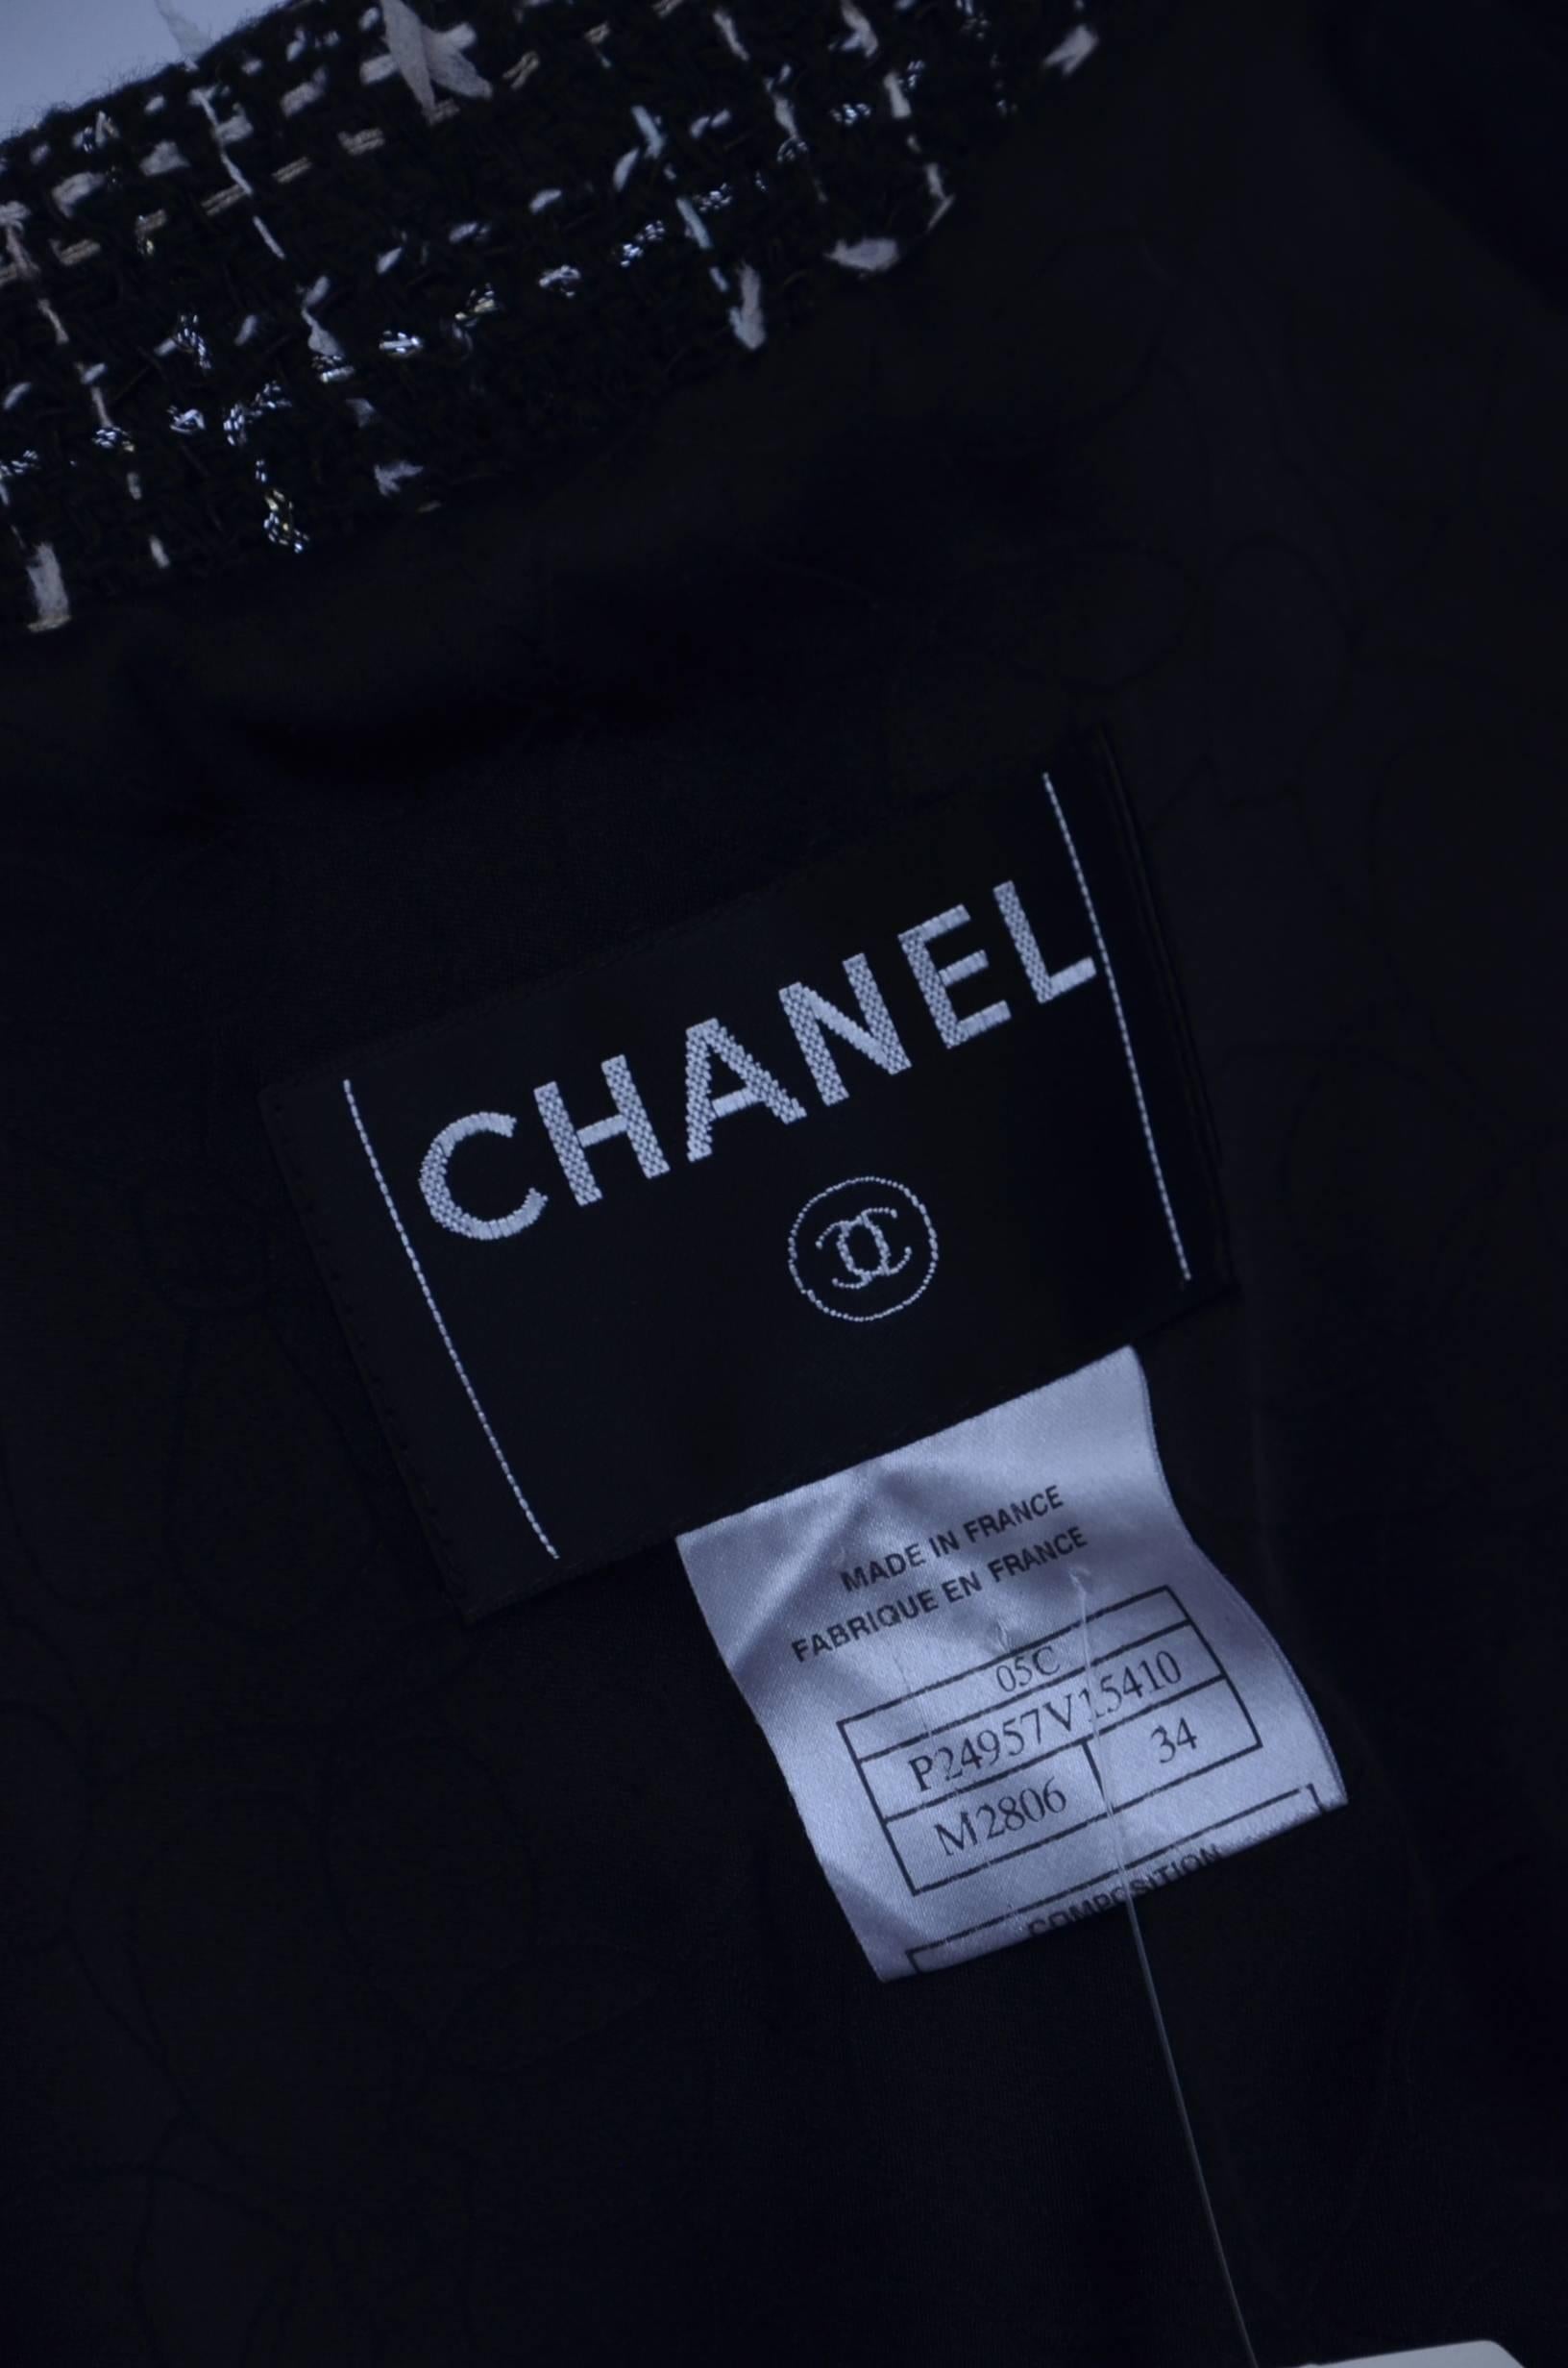 CHANEL '04 Coat   With Chanel  # 5 Parfume Bottle  Patch     34 4